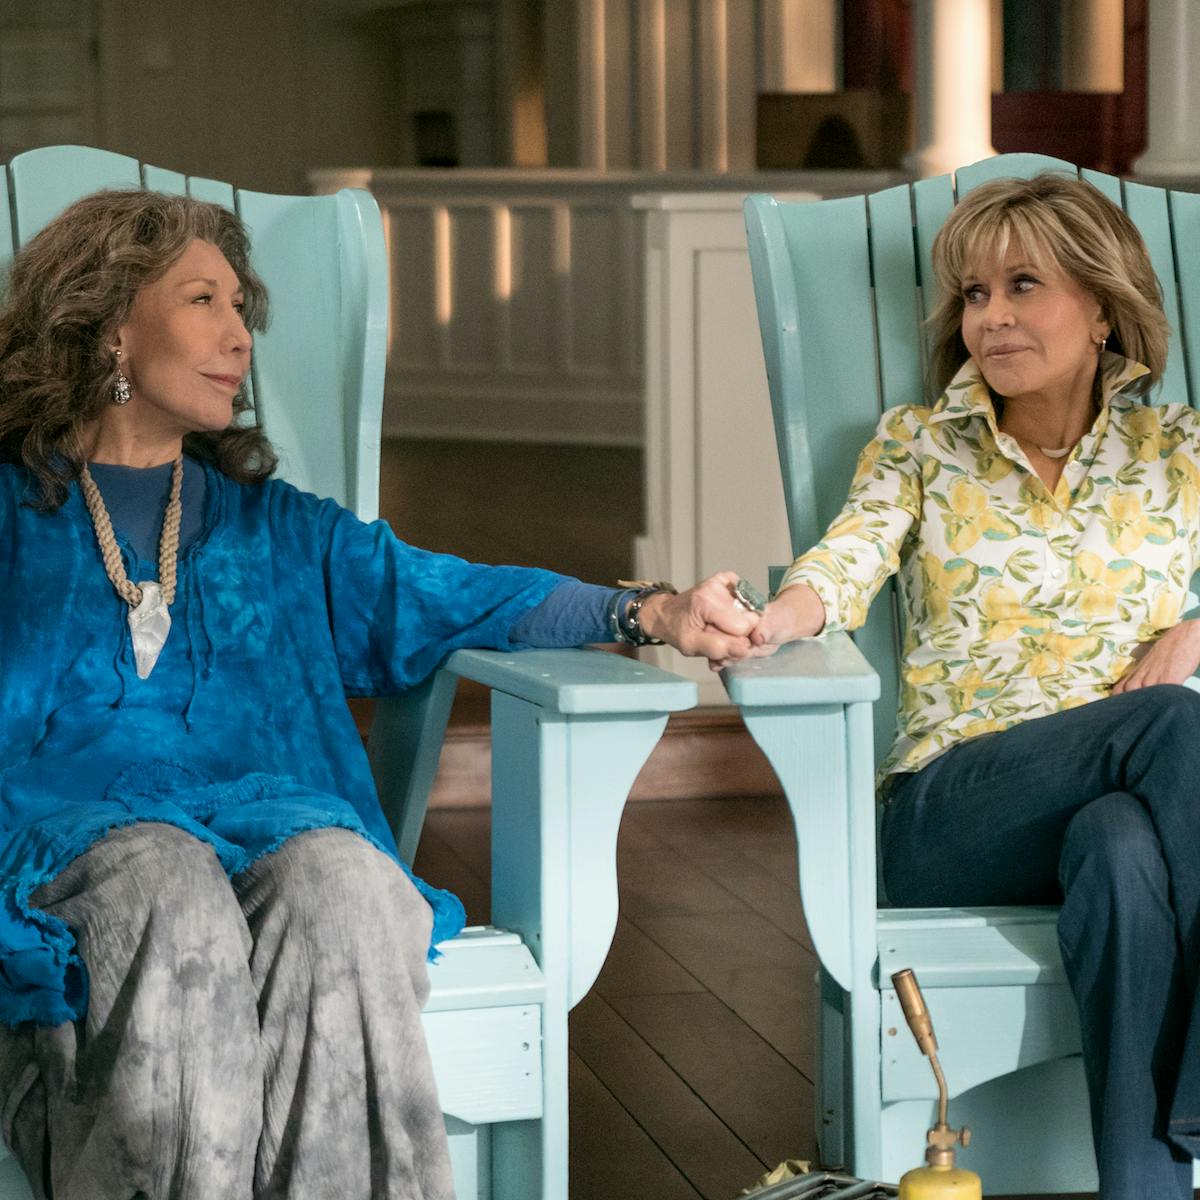 Frankie (Lily Tomlin) and Grace (Jane Fonda) sit in turquoise chairs holding hands.